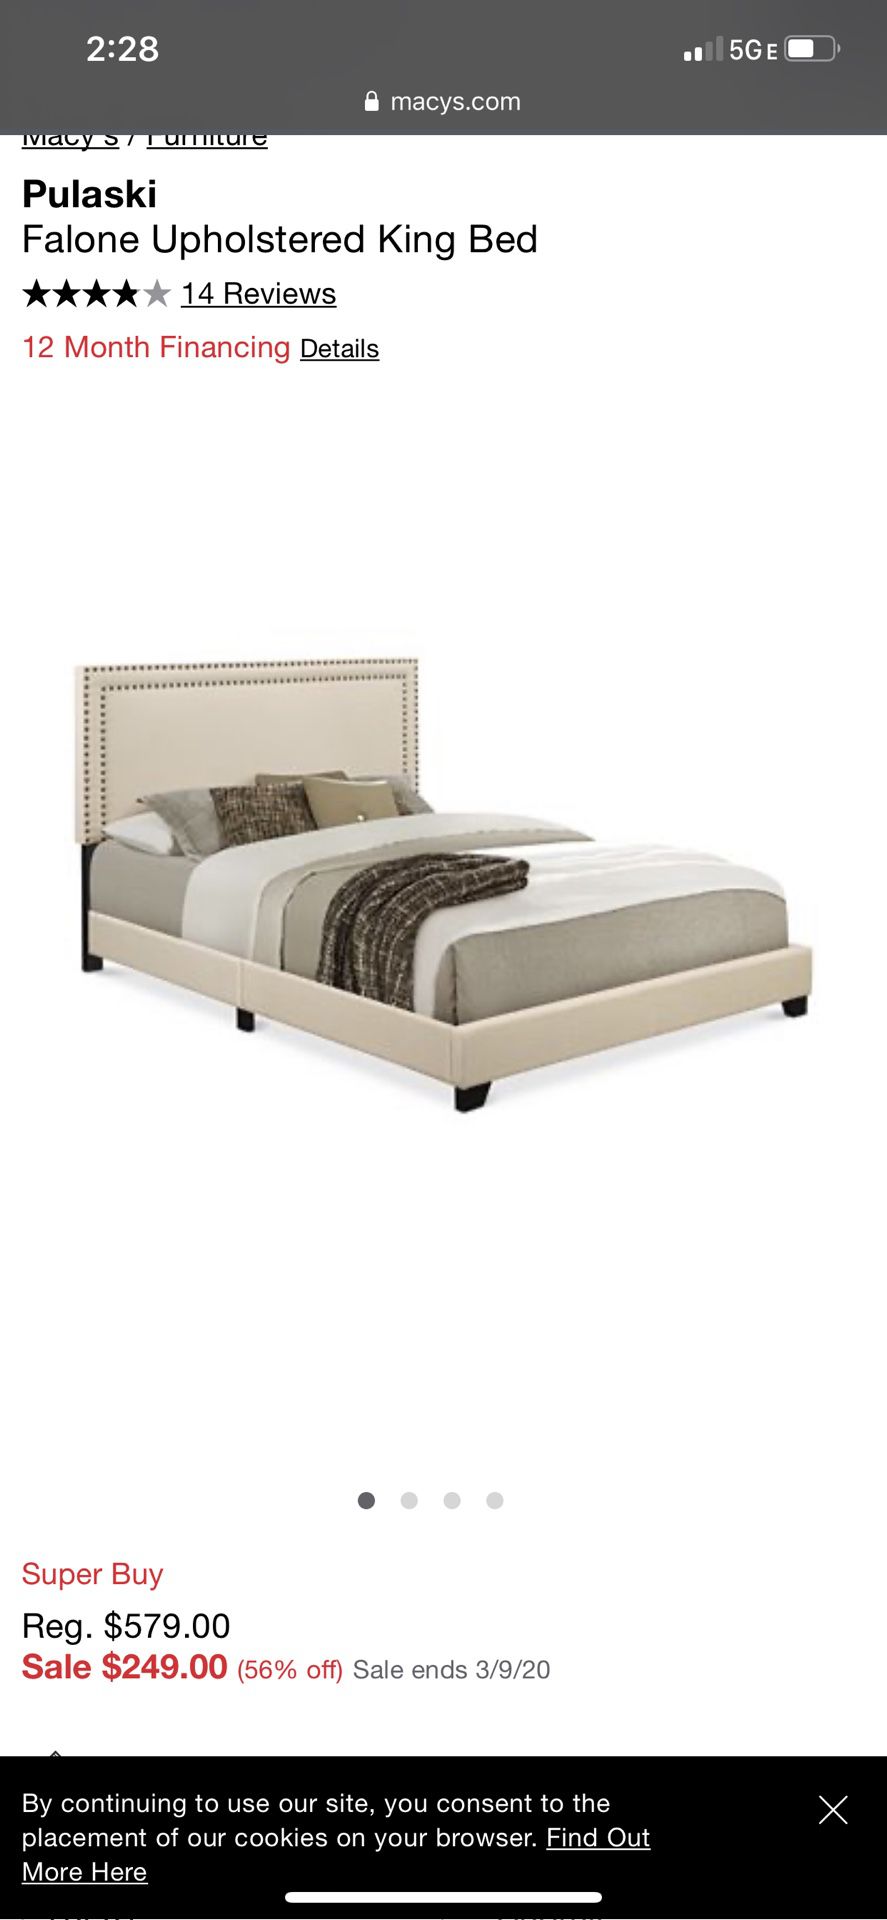 Brand new in box moving $150 queen headboard and bed frame